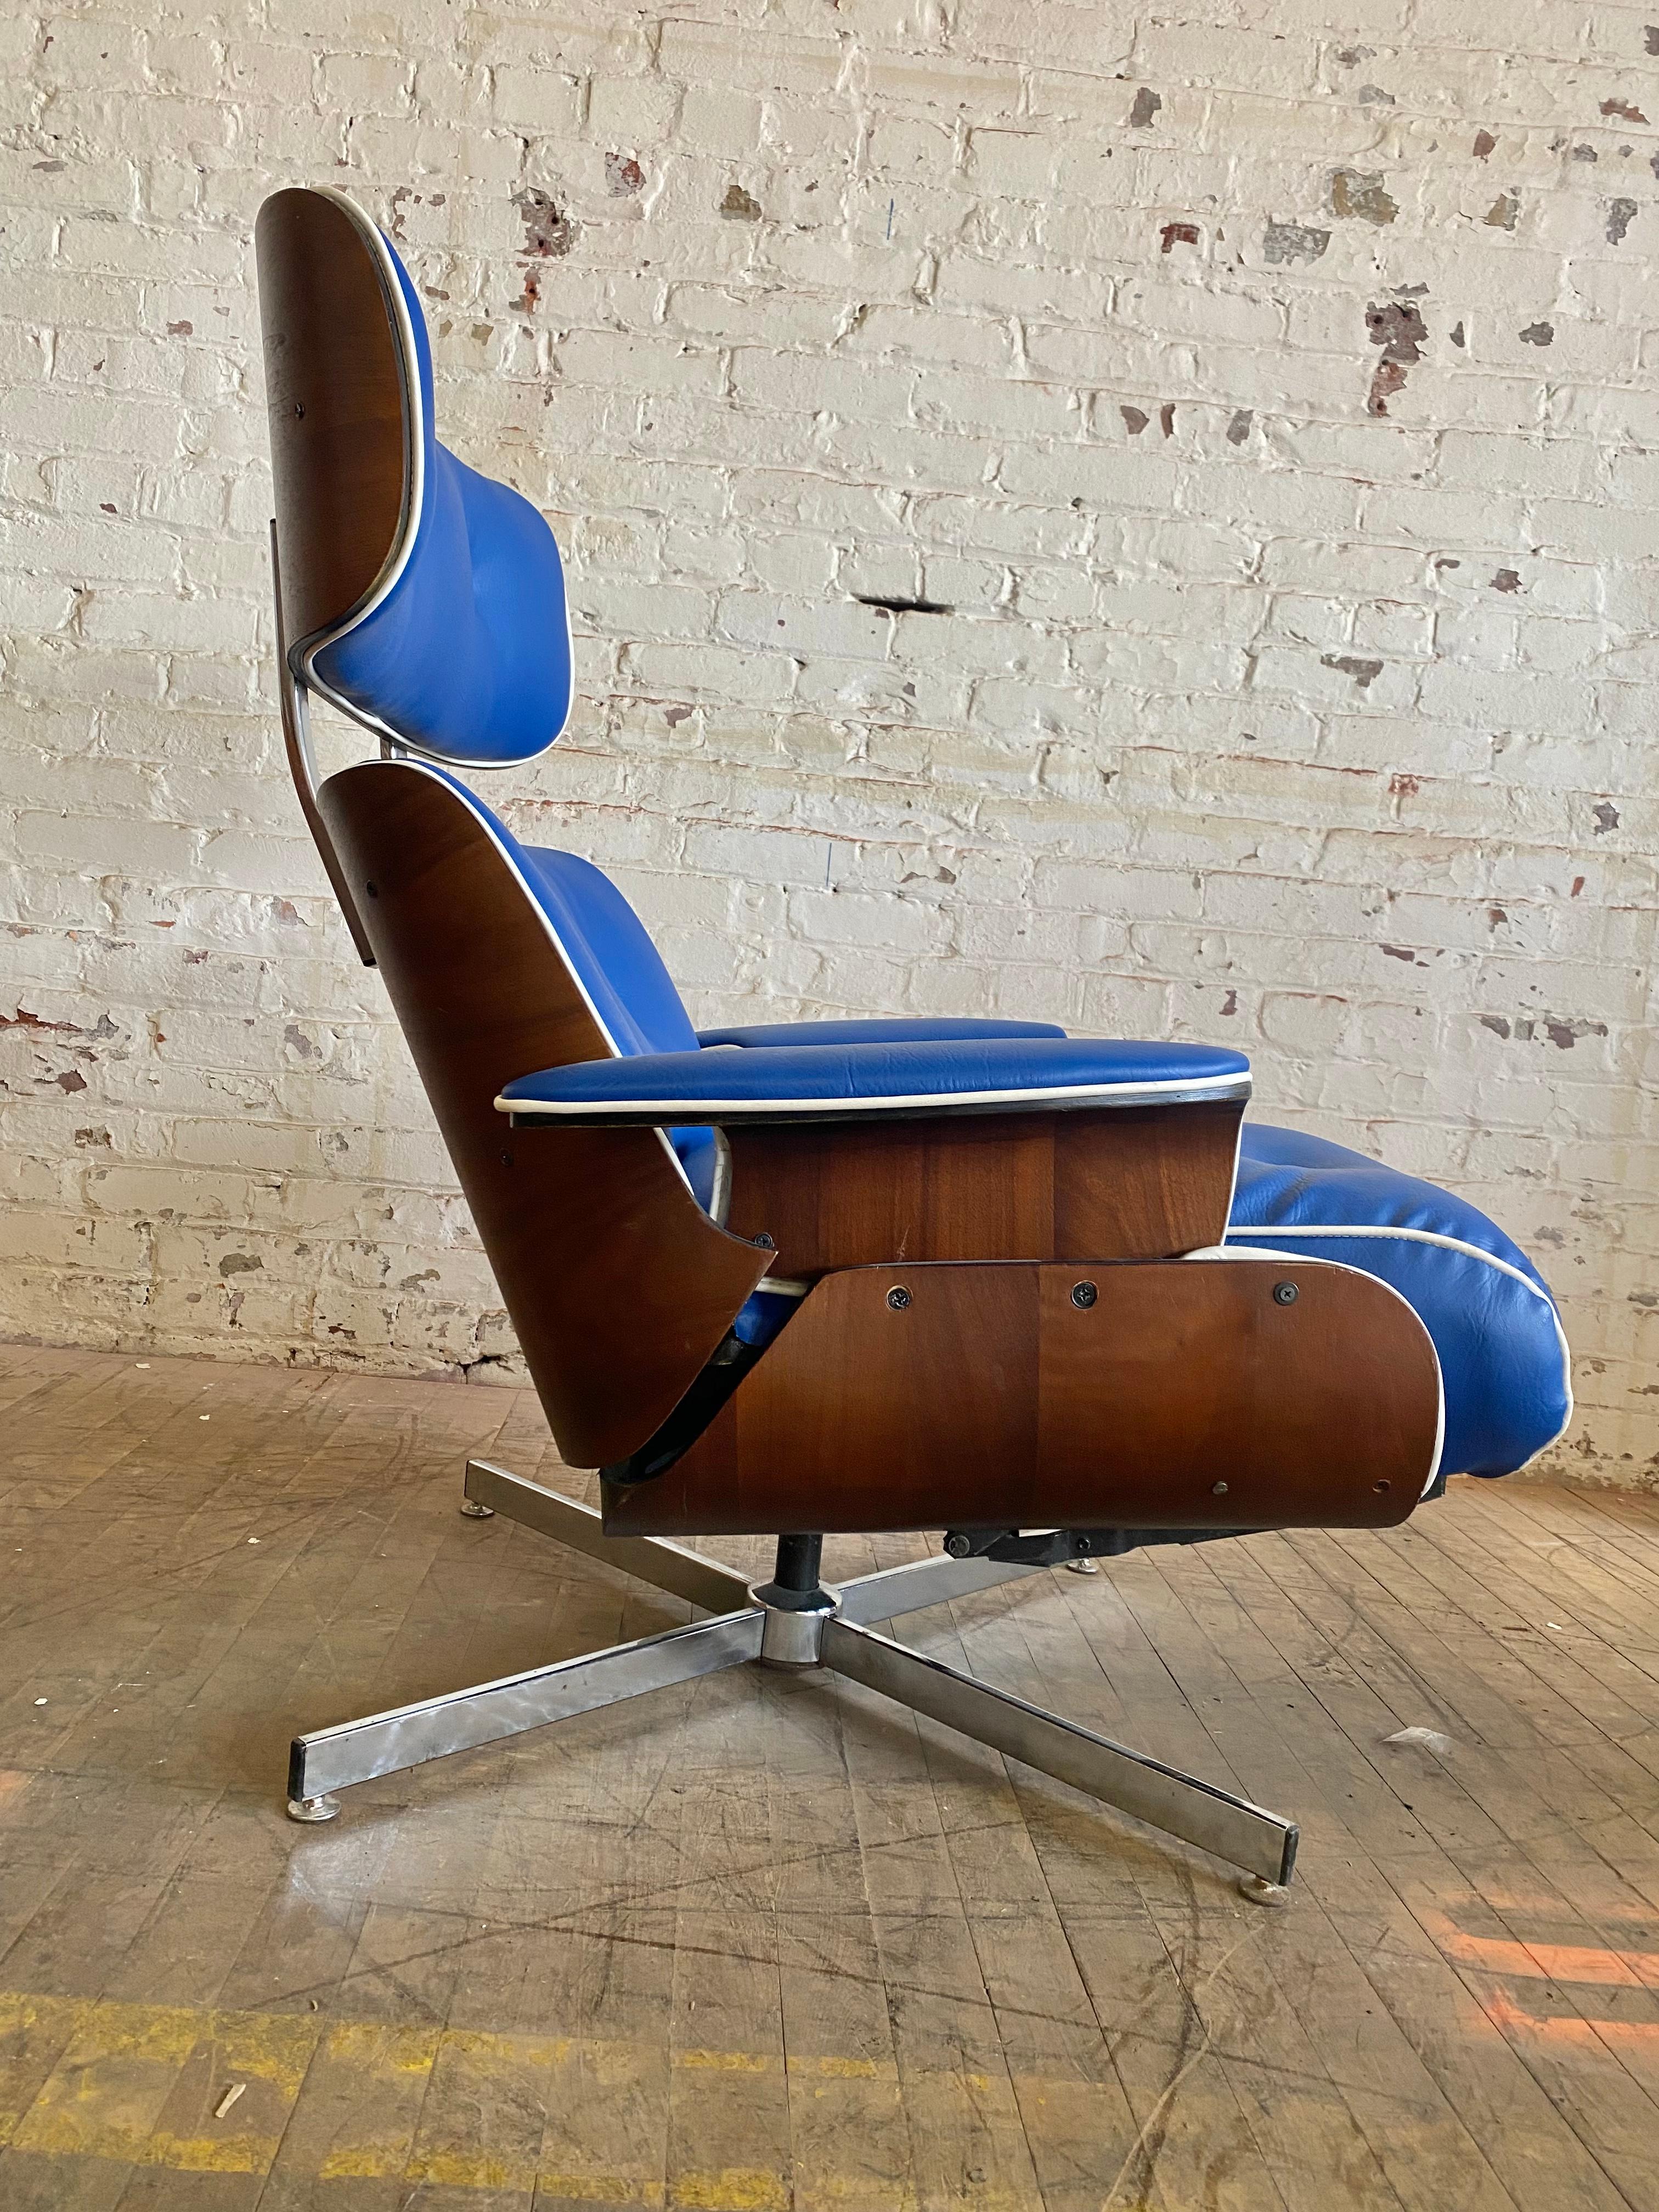 Naugahyde Eames Style Lounge Chair / Recliner, with Built in Ottoman Made by Plycraft